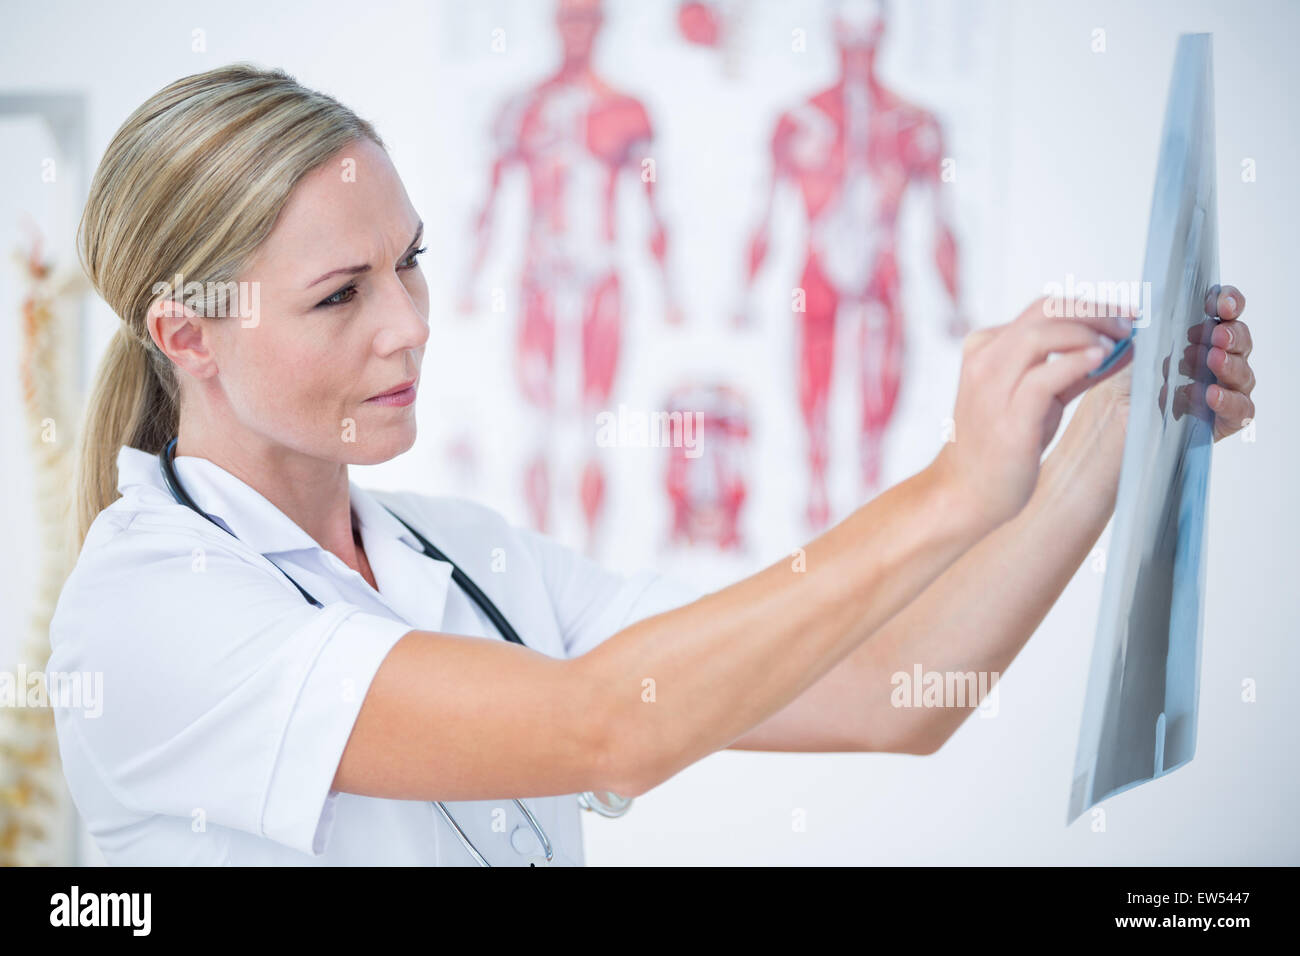 Concentrate doctor looking at X-Rays Stock Photo